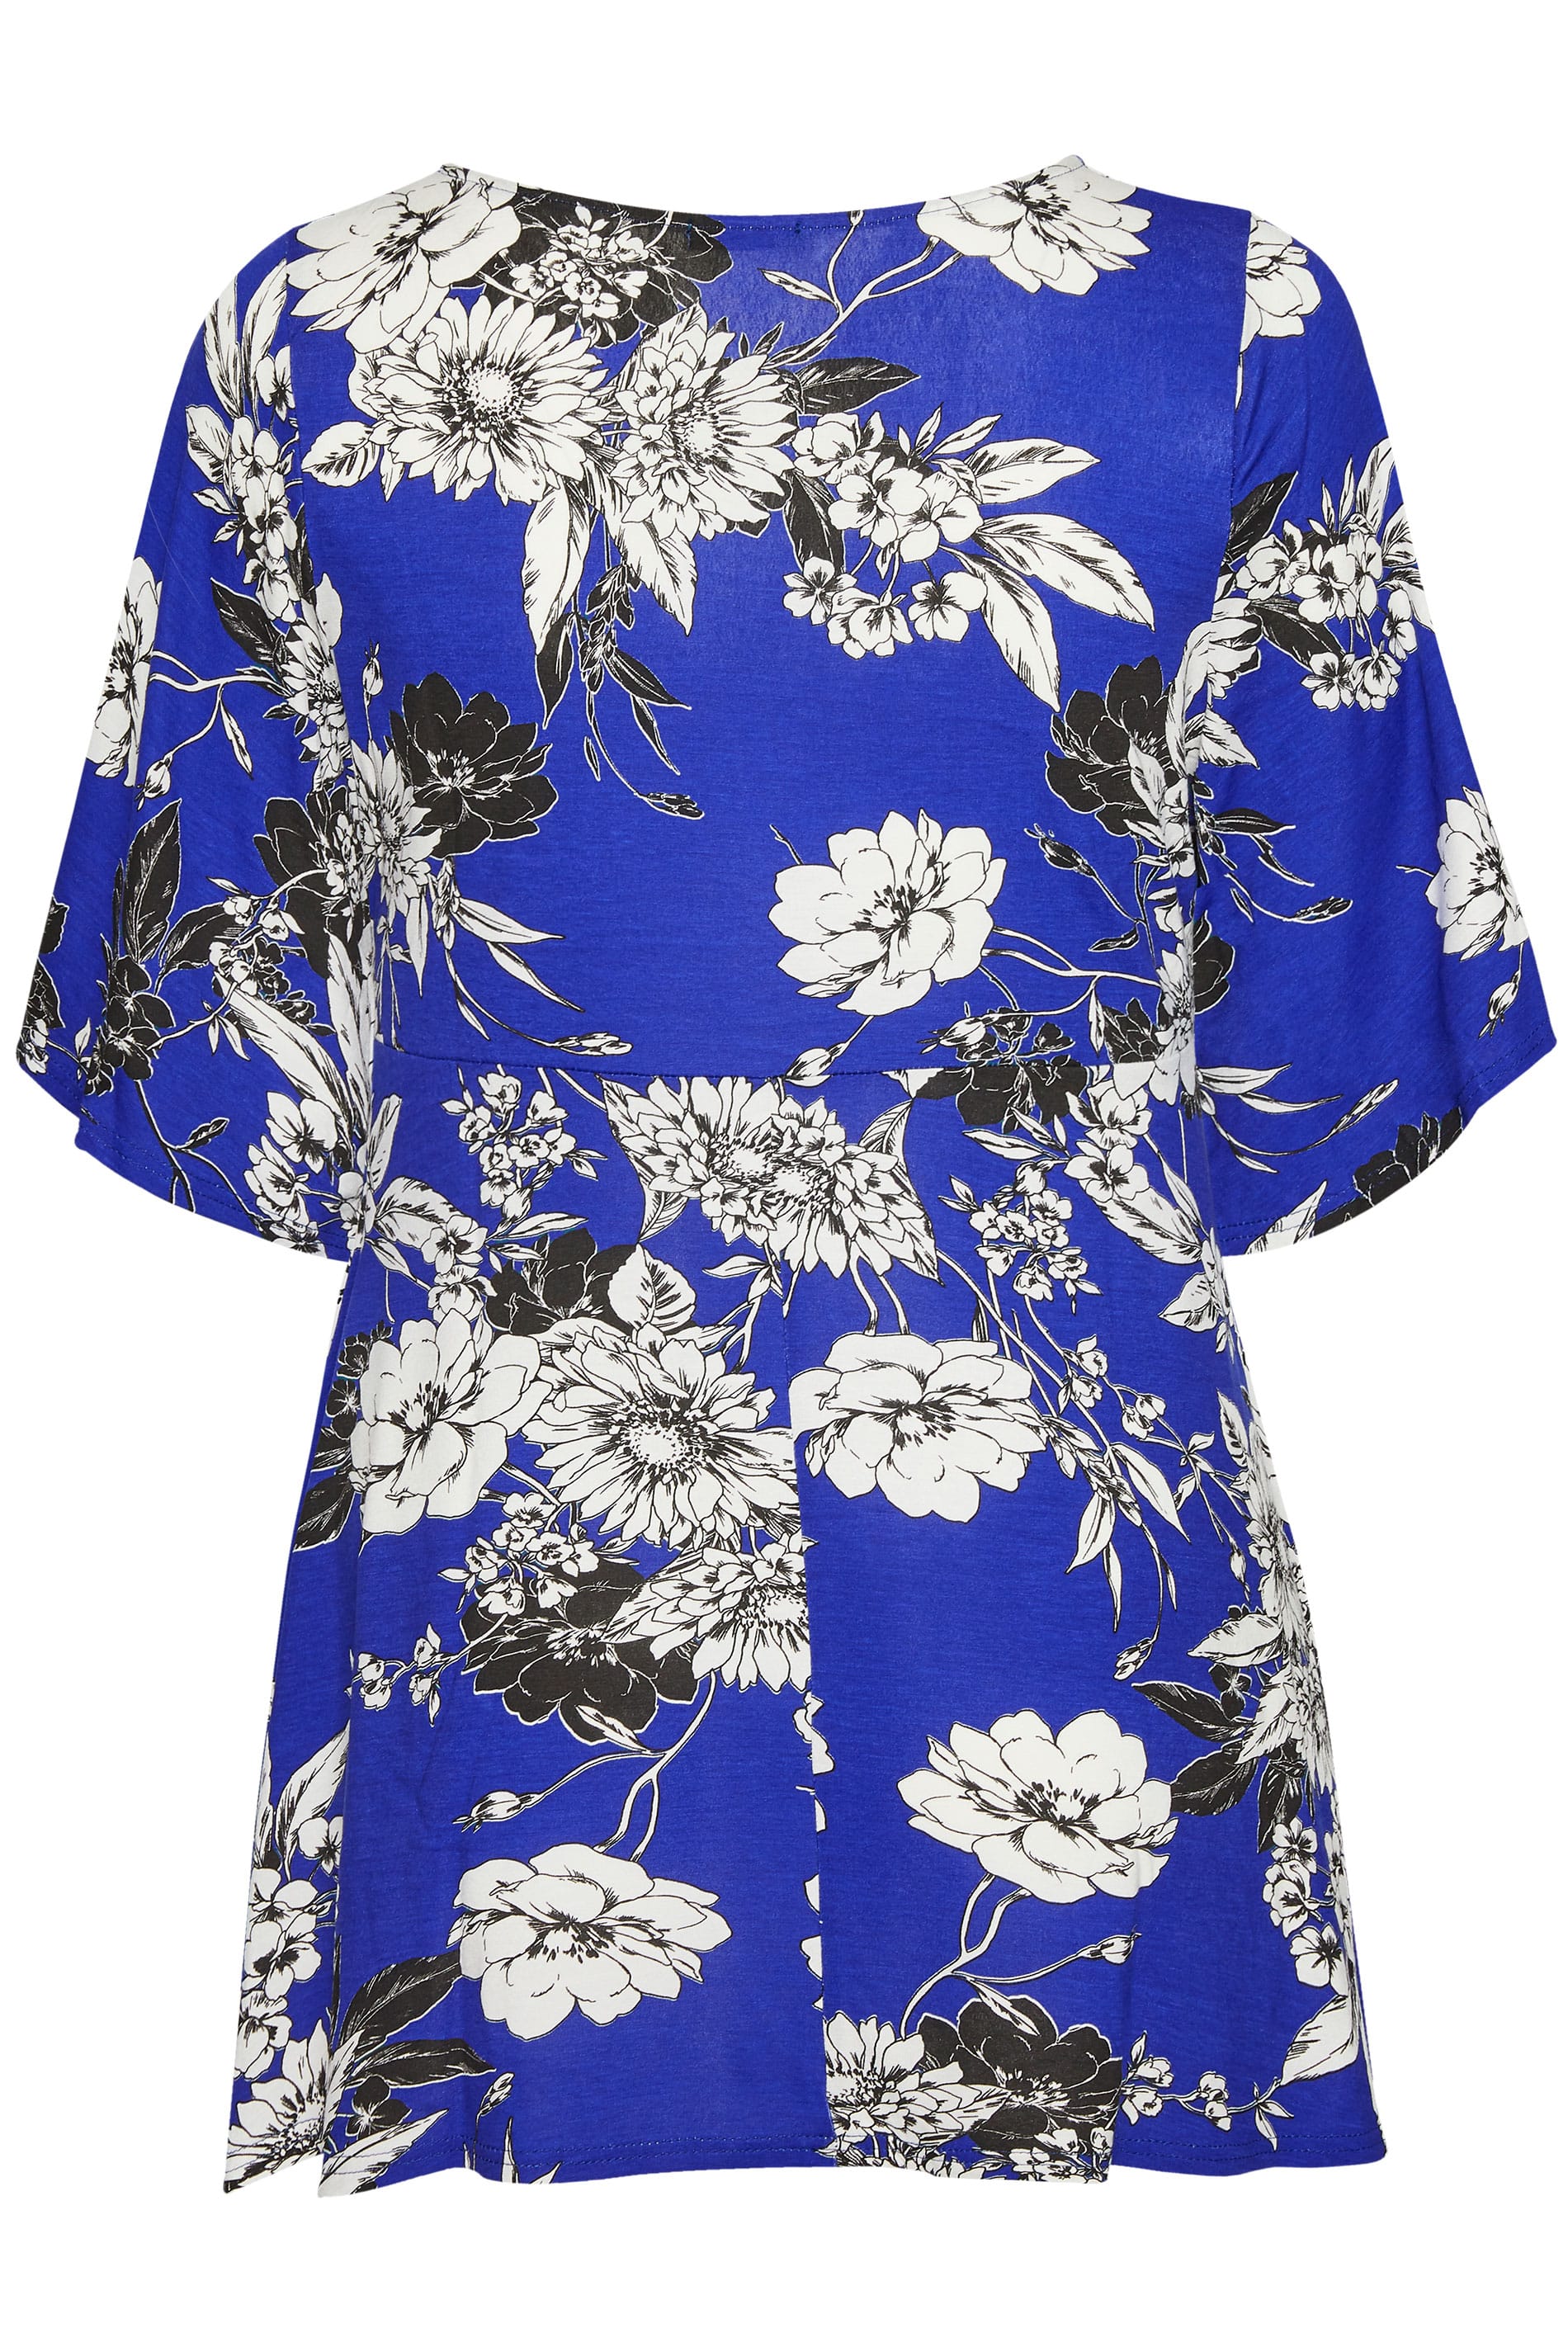 Cobalt Blue Floral Top | Sizes 16 to 36 | Yours Clothing